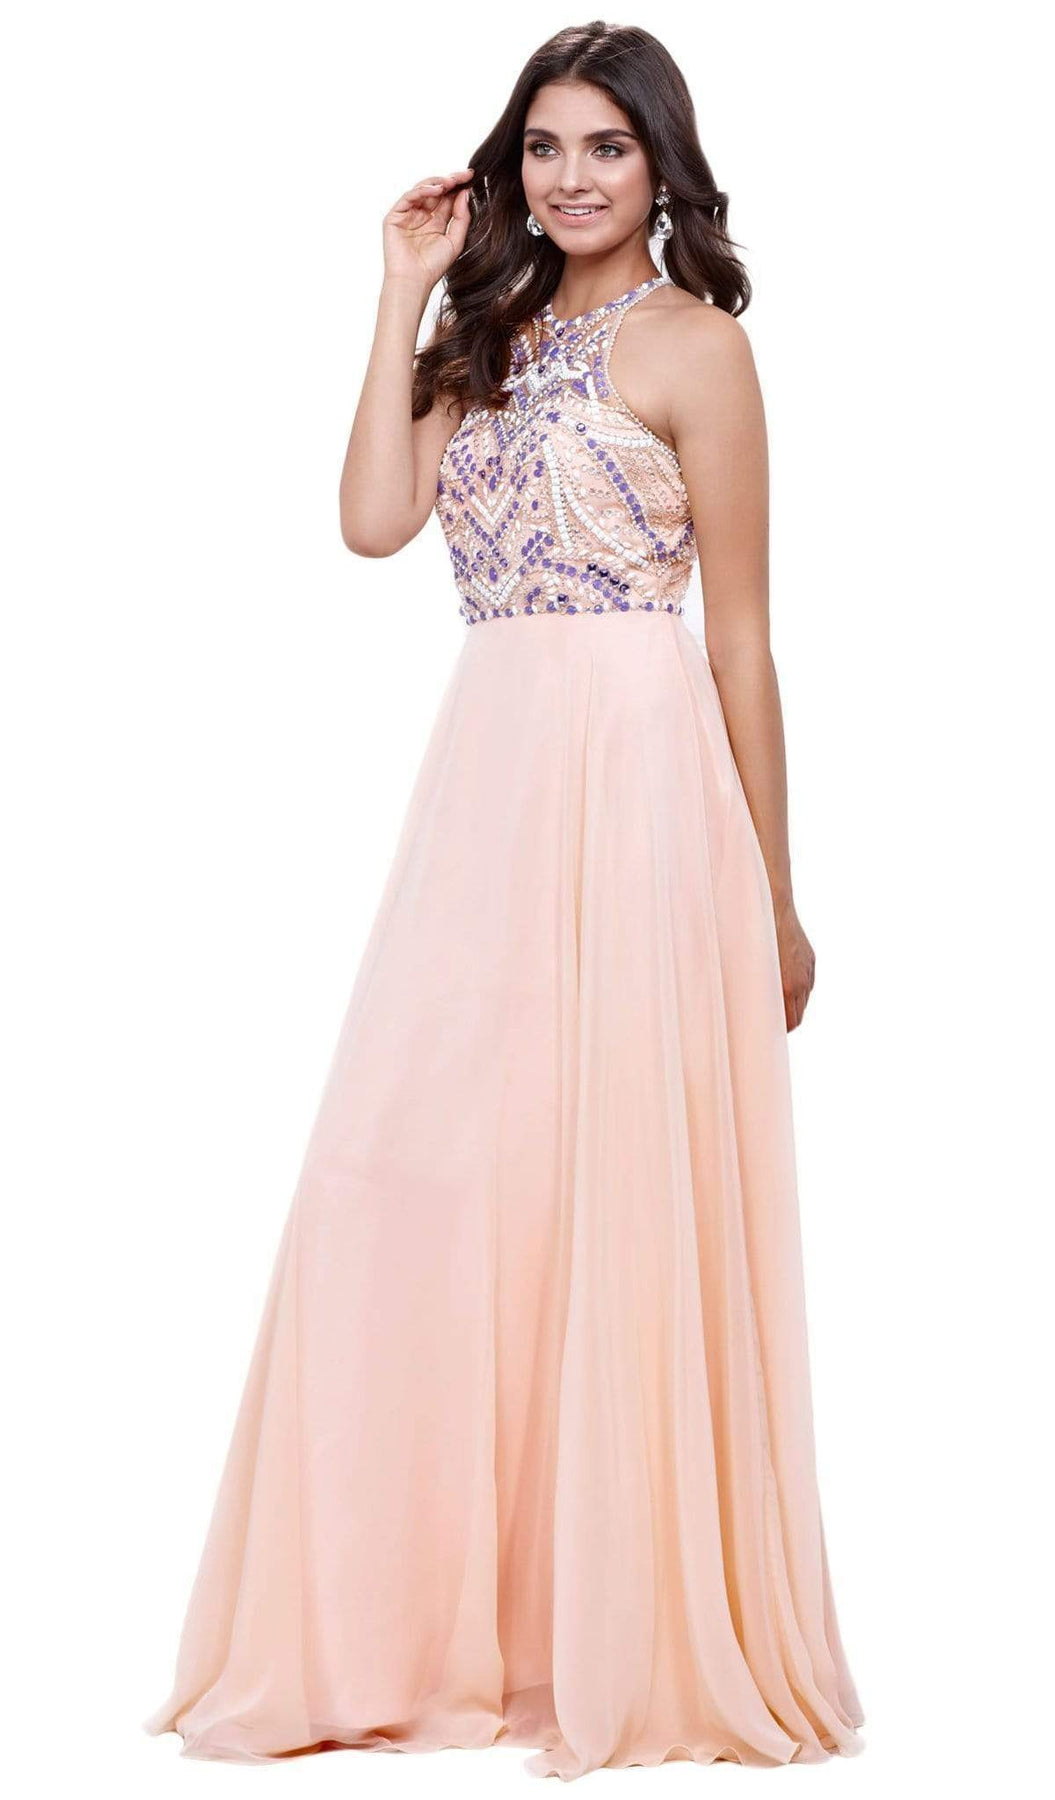 Nox Anabel - 8276 Sleeveless Bejeweled Halter A-line Dress Special Occasion Dress XS / Nude & Purple